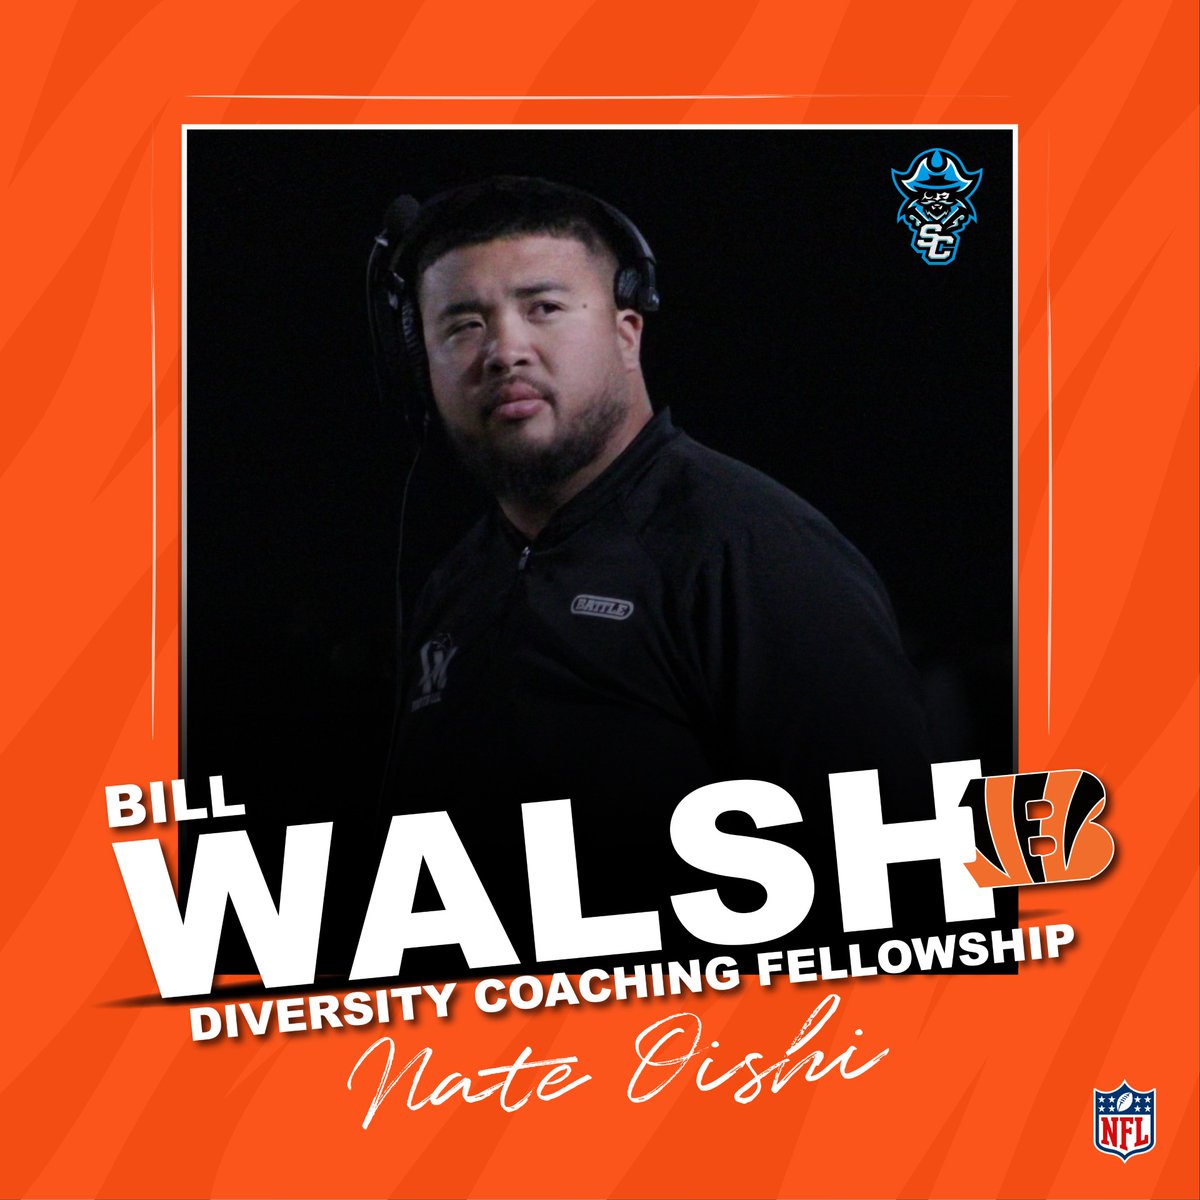 Congratulations to #NCMFC member @CoachNateOishi for being selected for the @Bengals Bill Walsh Diversity Coaching Fellowship! #JoinTheCoalition #PreparePromoteProduce